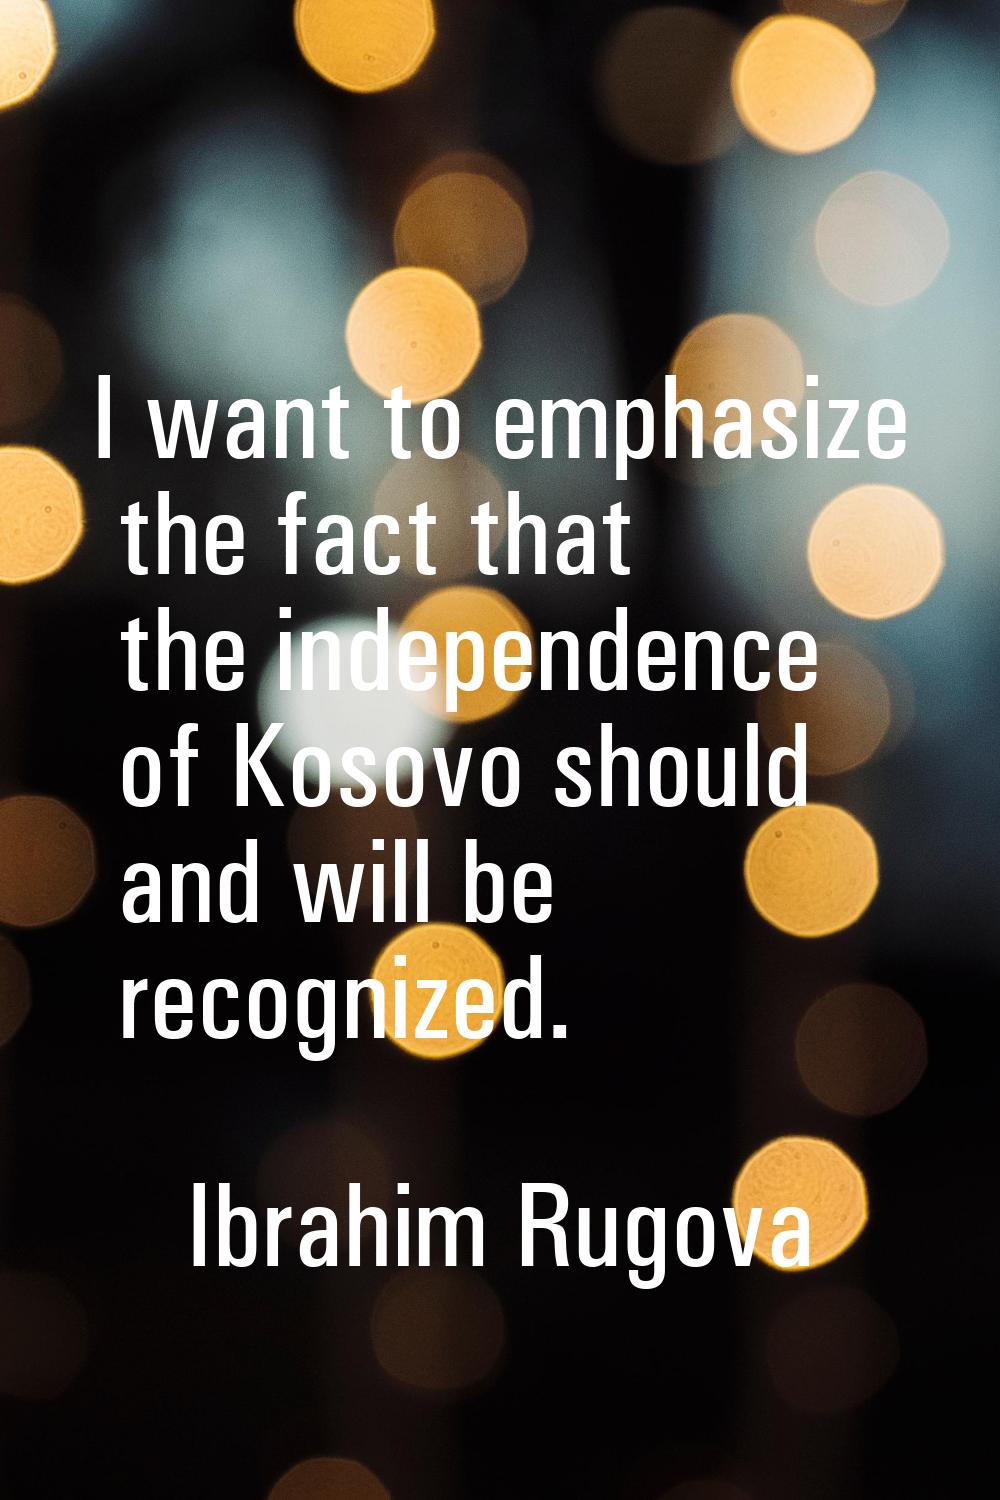 I want to emphasize the fact that the independence of Kosovo should and will be recognized.